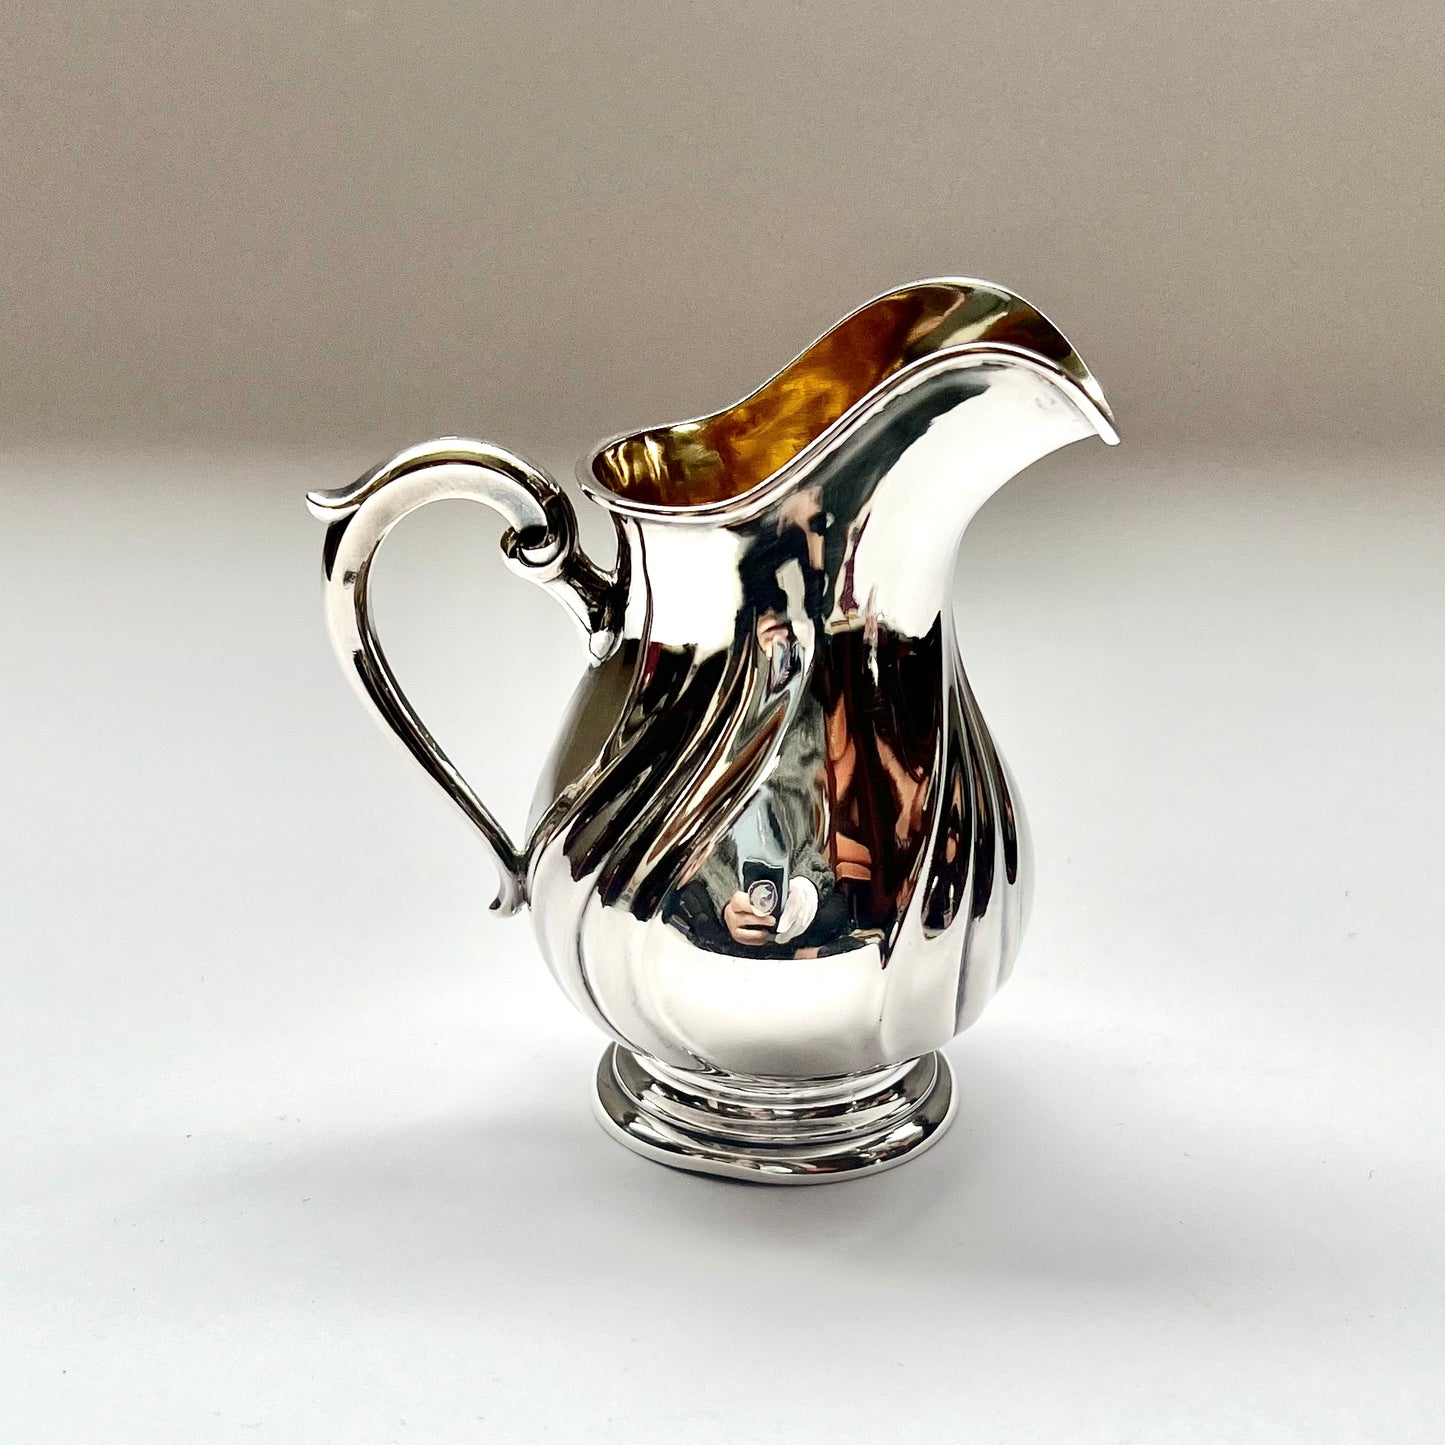 Fine antique Continental European early 20th century sterling silver creamer jug